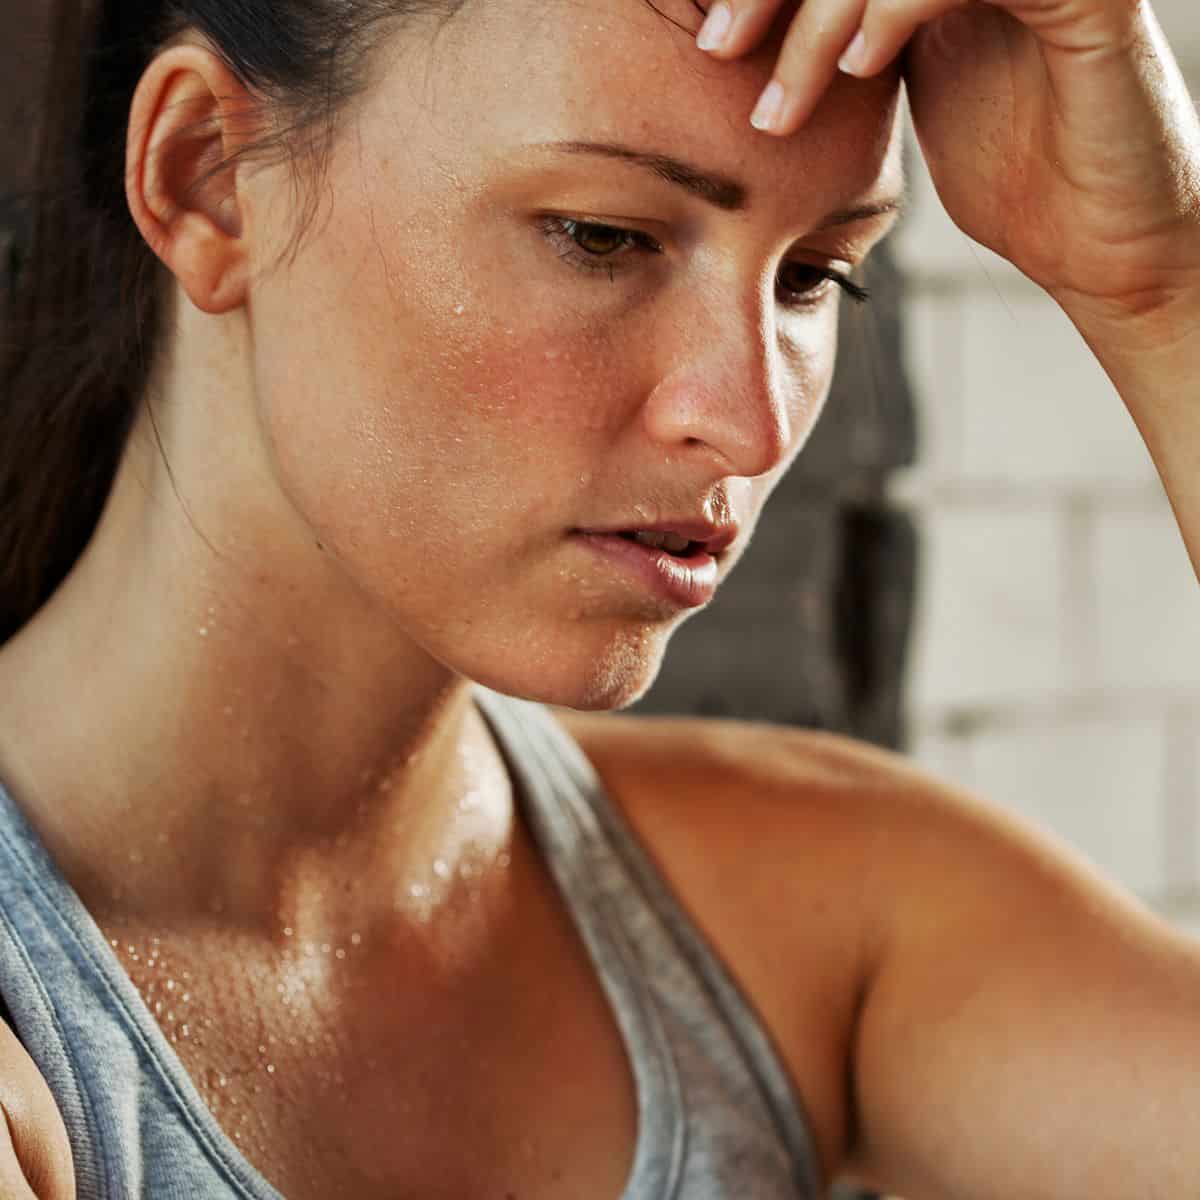 Why Do We Excessively Sweat When We Are on a Keto Diet